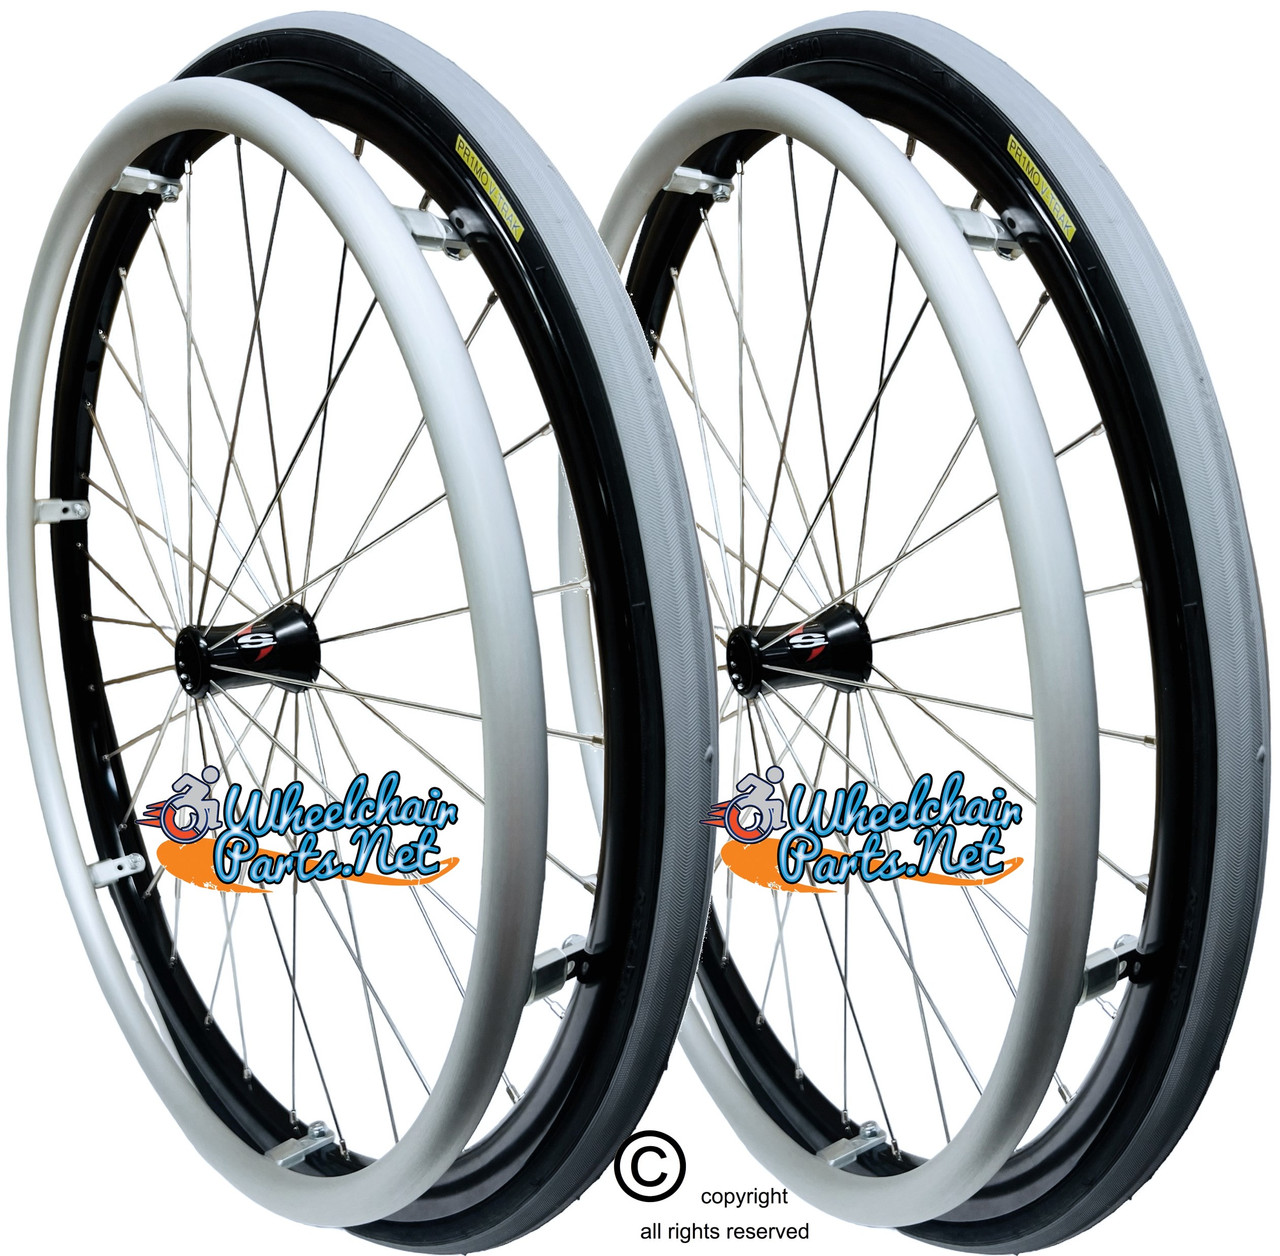 25" x 1" Spinergy 30 Spoke Rear Wheel With Primo PNEUMATIC  Racer Tire (Grey Color)